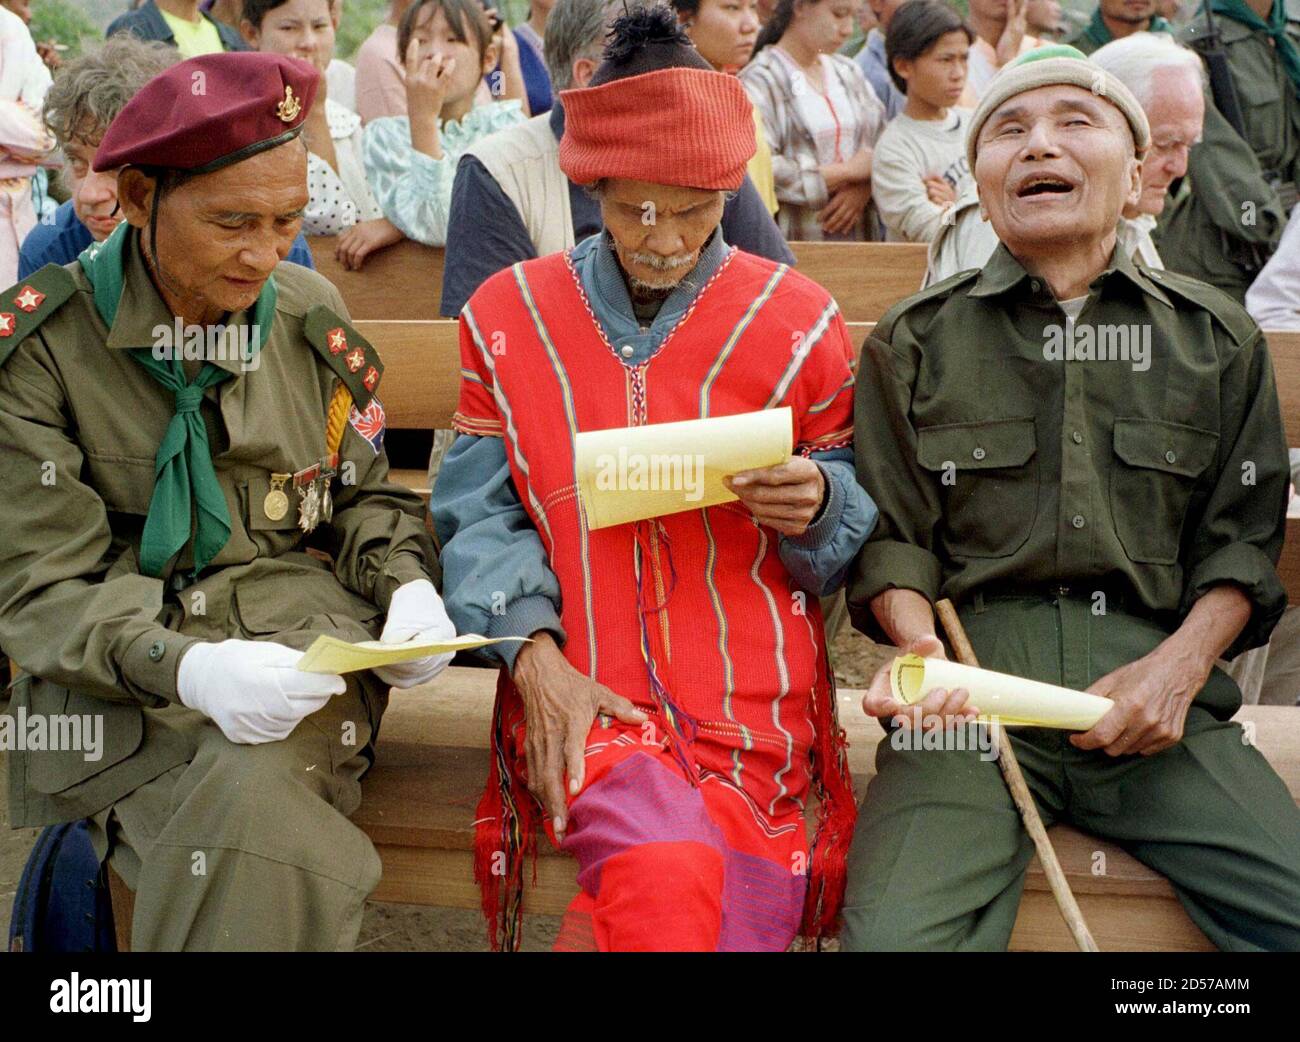 Veterans of the Karen National Union (KNU) read a certificate given to them during celebrations marking the KNU's 50th year of fighting for an autonomous state in the military base of Tadoh Thutan on the bank of the Moei river in eastern Myanmar January 31. The KNU is one of the only ethnic groups in Myanmar that has not entered into a cease-fire agreement with the SPDC (State Peace and Development Council, formerly SLORC) the military regime in Yangon the capital. Stock Photo